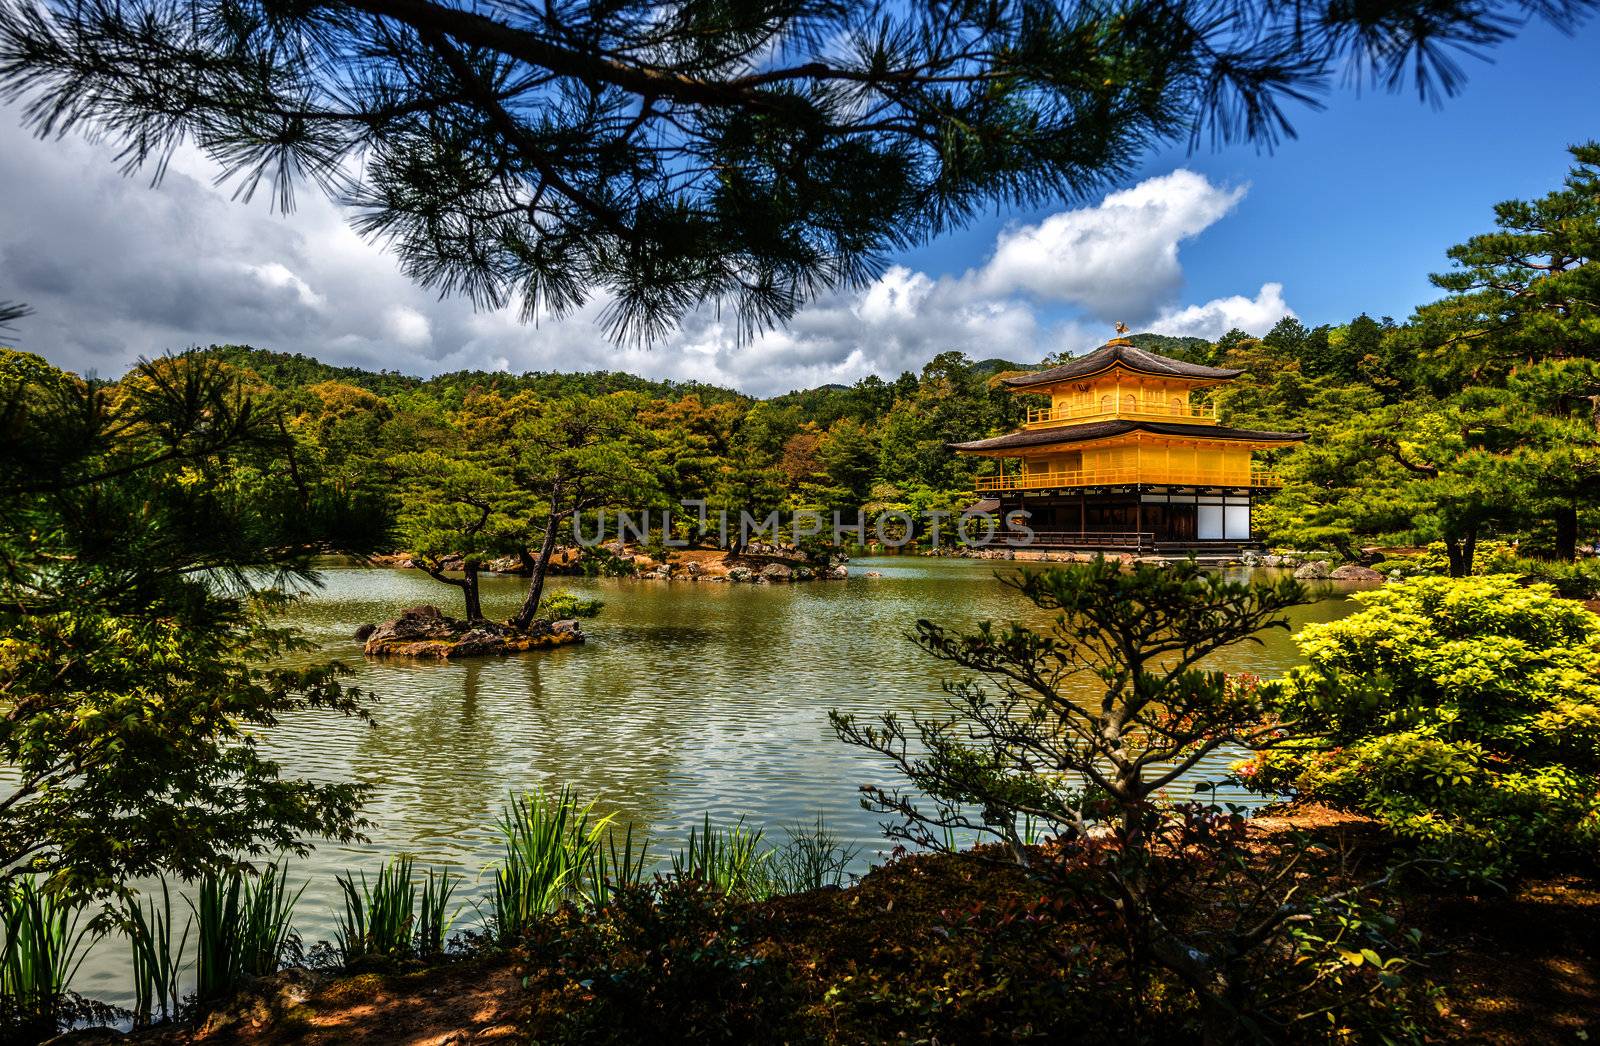 Kinkakuji Temple (The Golden Pavilion) in Kyoto, Japan  by inarts